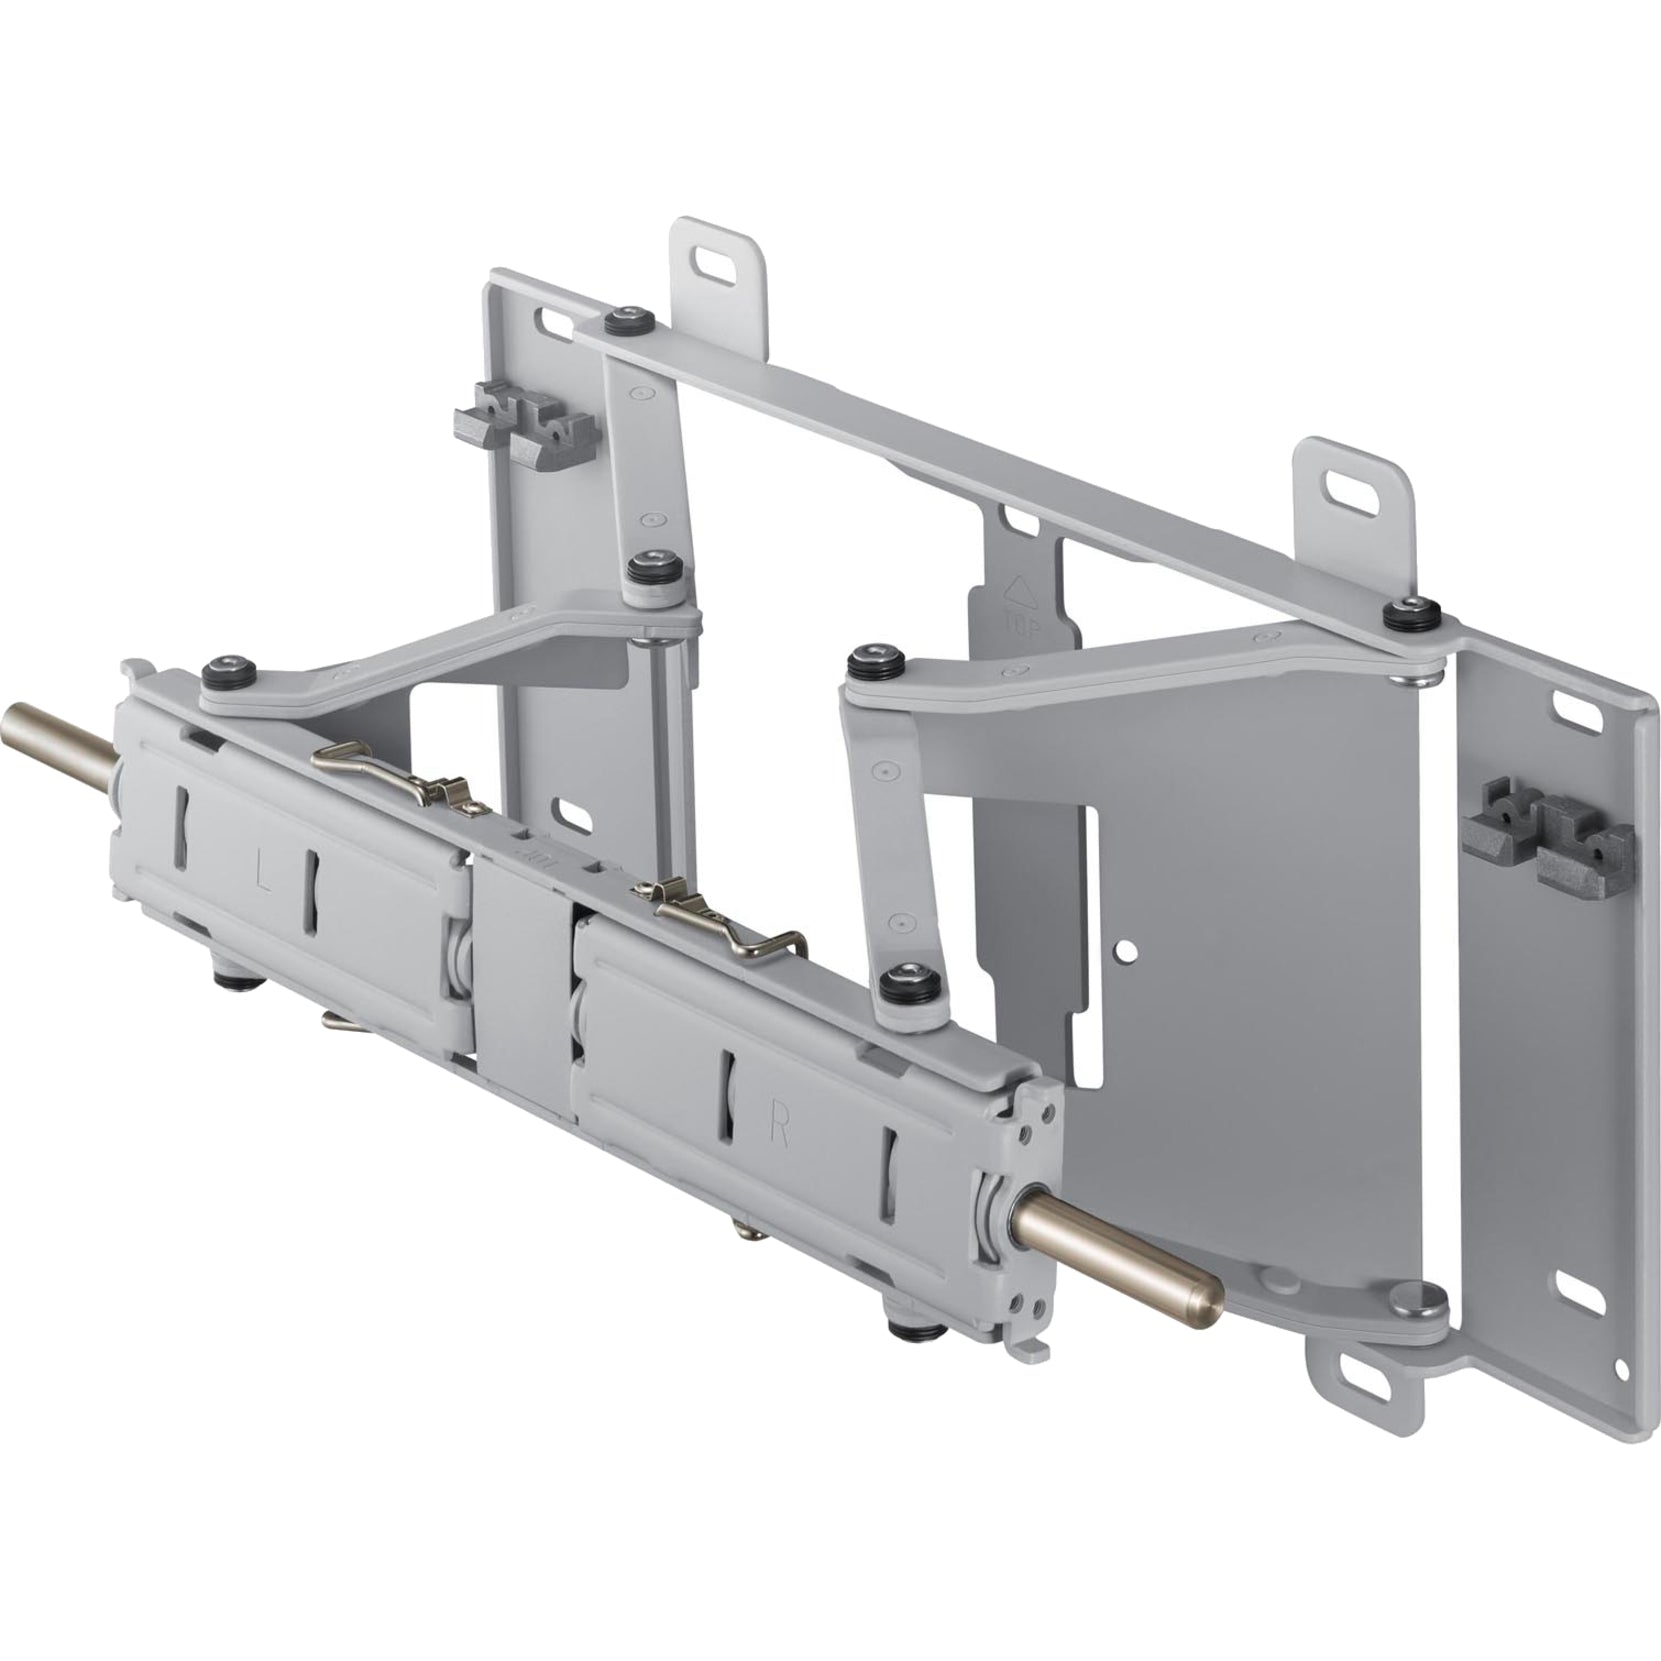 Samsung WMN-4270SD Wall Mount for Flat Panel Display, Easy Installation and Secure Mounting